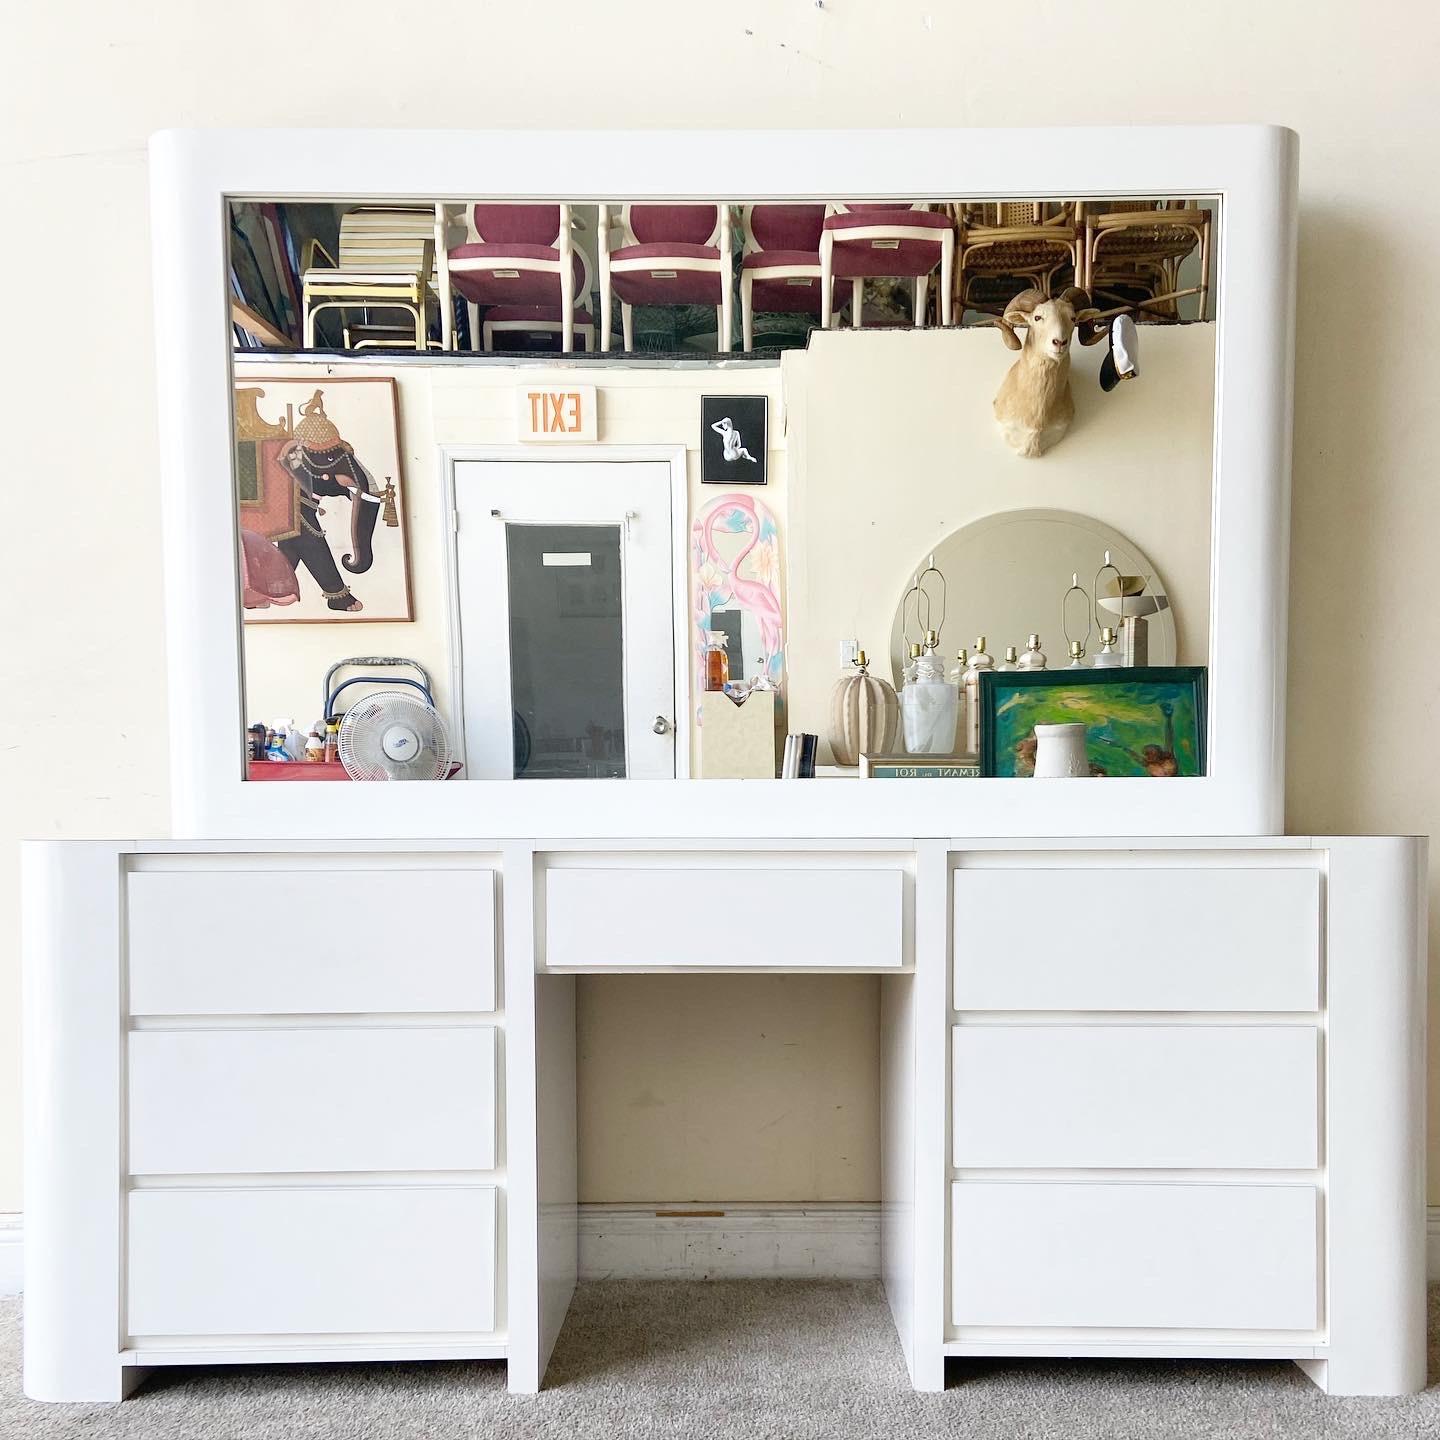 Exceptional postmodern 1980s vanity desk/dresser. Features an oversized mirror with white lacquer laminate and 7 spacious drawers.

Dresser measures 73” W, 18.5” D, 28.5” H
Mirror measures 68” W, 5” D, 41” H
Stool measures: 13